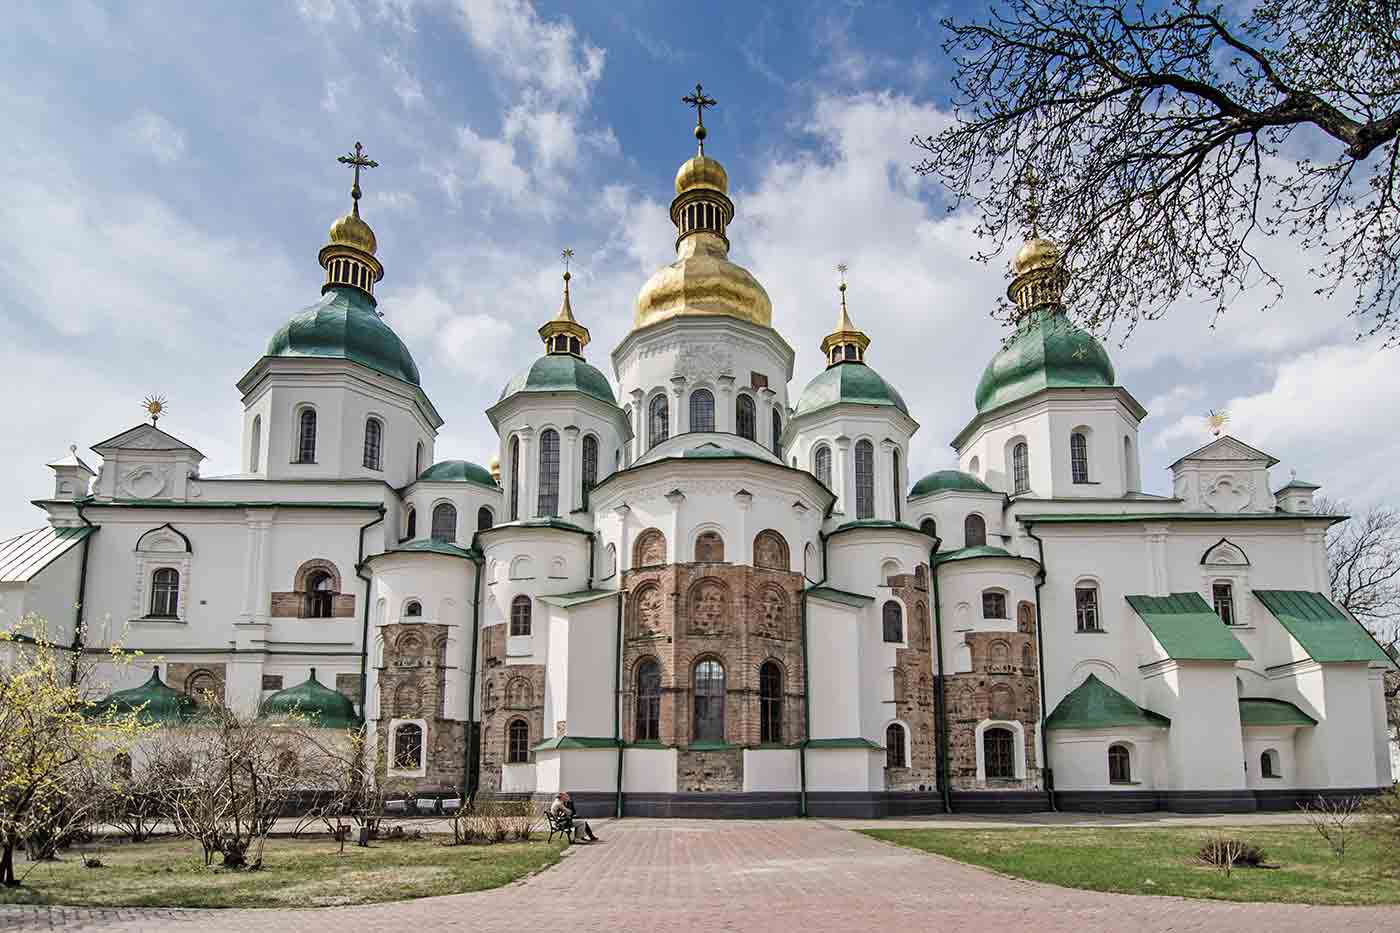 St. Sophia’s Cathedral